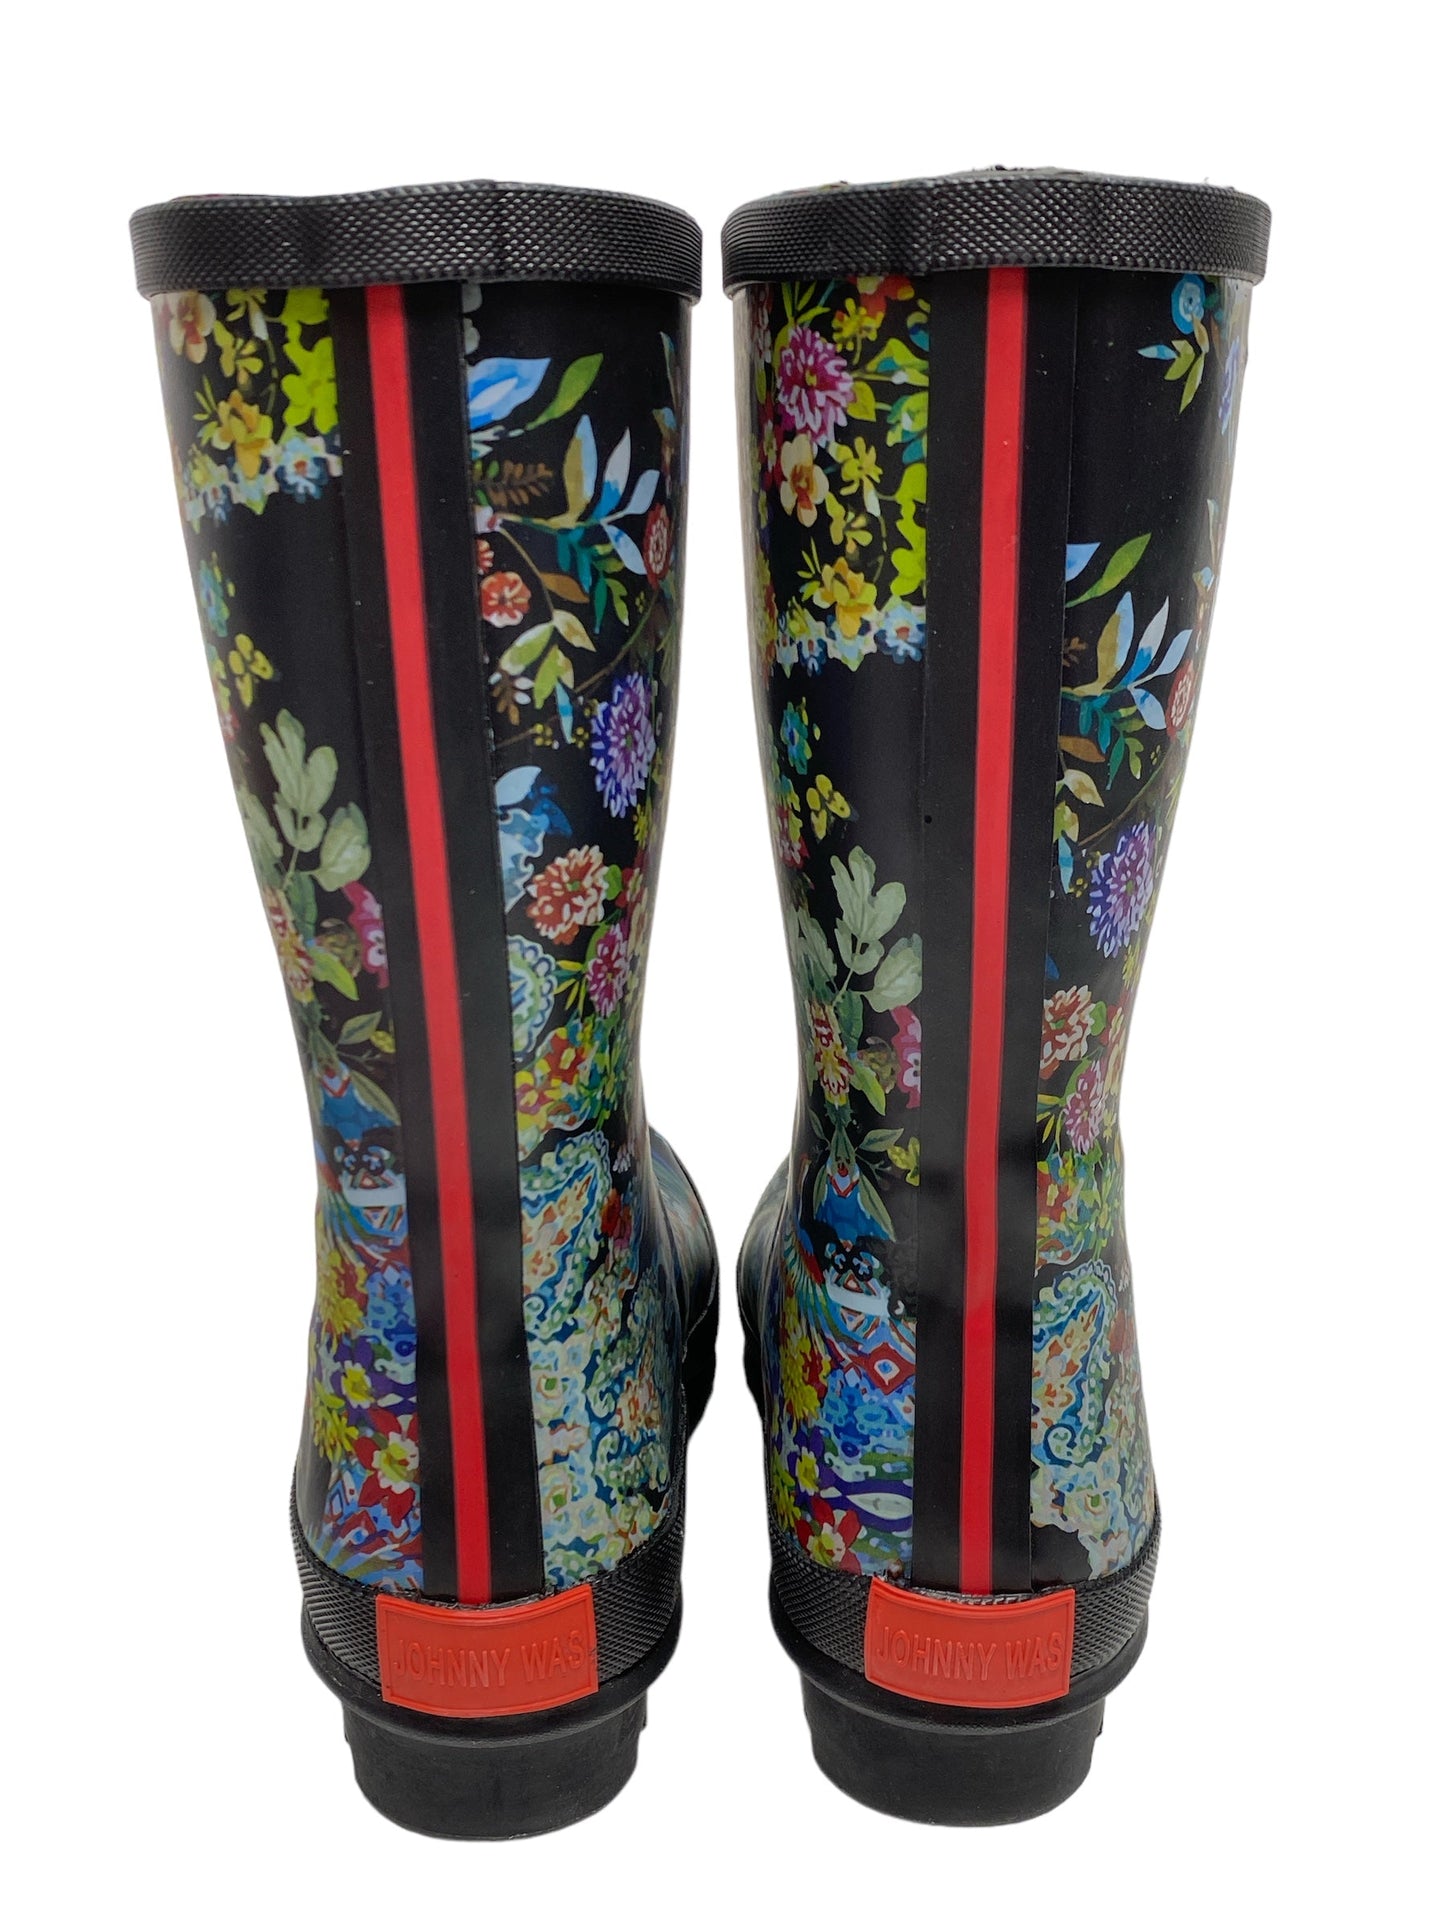 Floral Print Boots Rain Johnny Was, Size 7